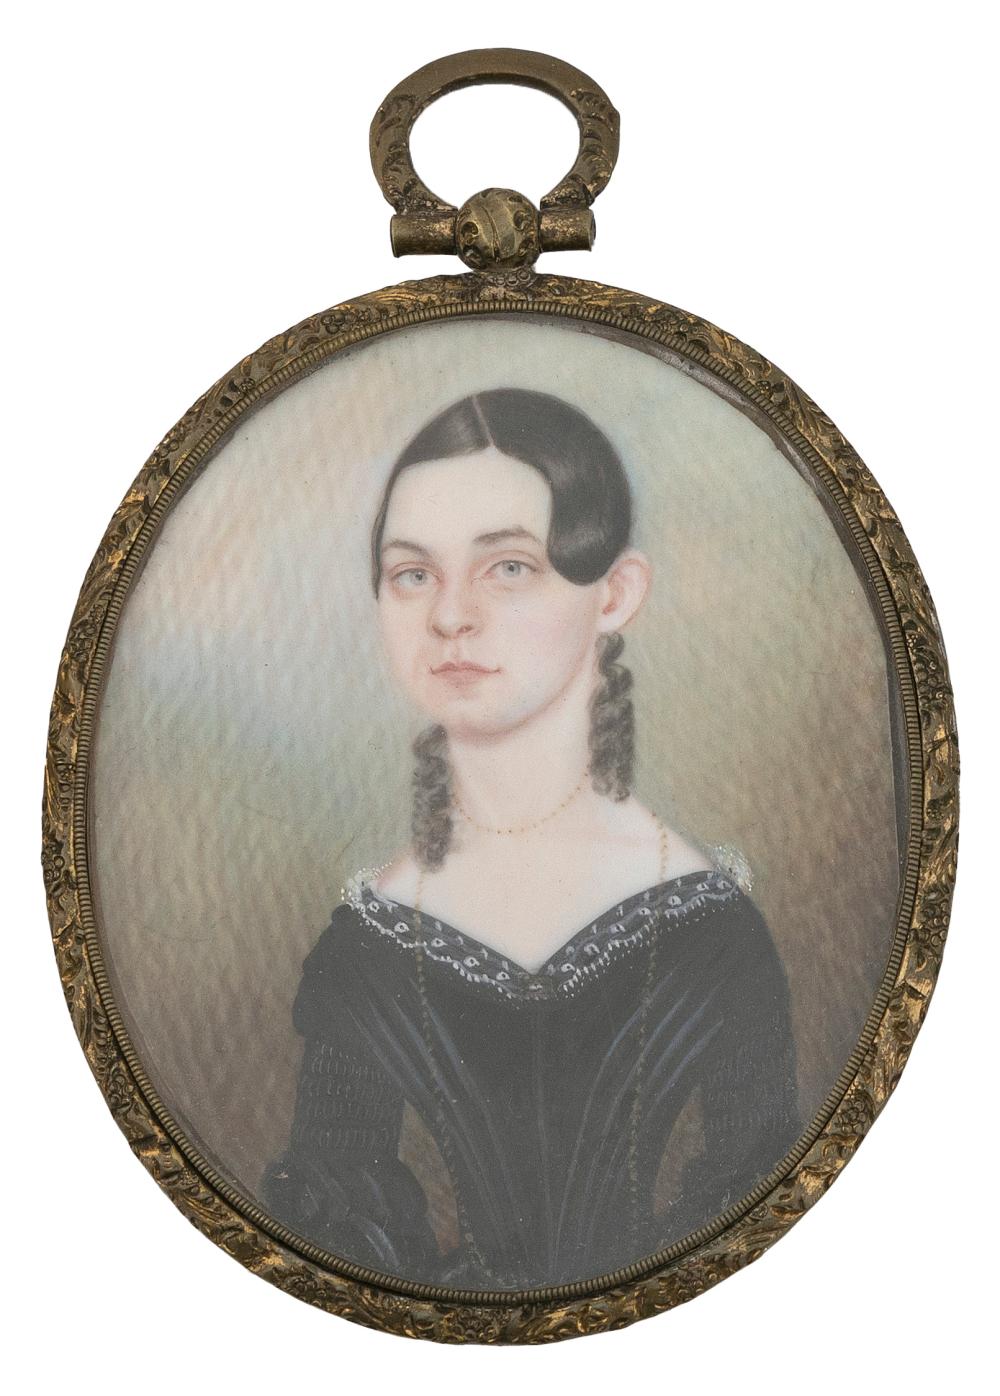 MINIATURE PORTRAIT OF A YOUNG WOMAN